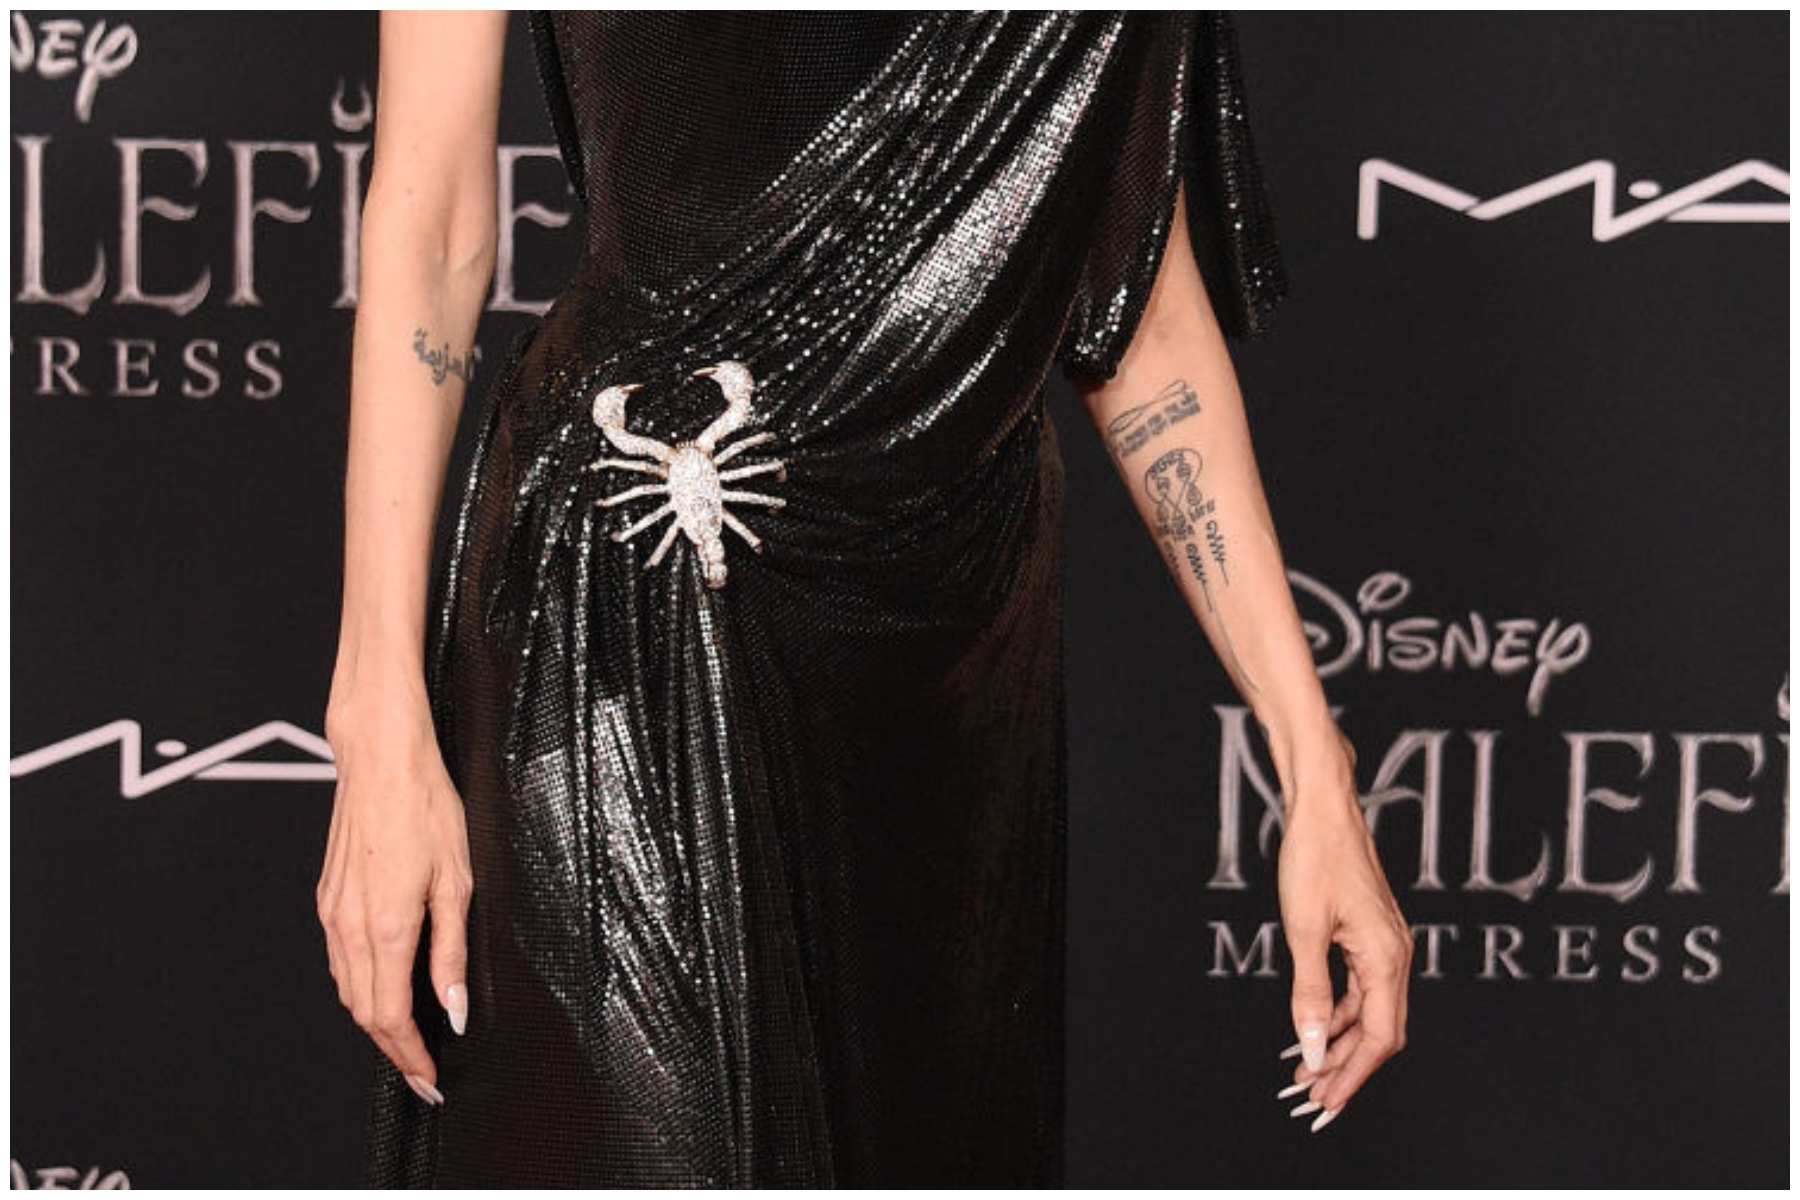 Angelina Jolie's Buddhist Swirl tattoo is seen as she arrives at the World Premiere Of Disney's "Maleficent: Mistress Of Evil" in Los Angeles, California.